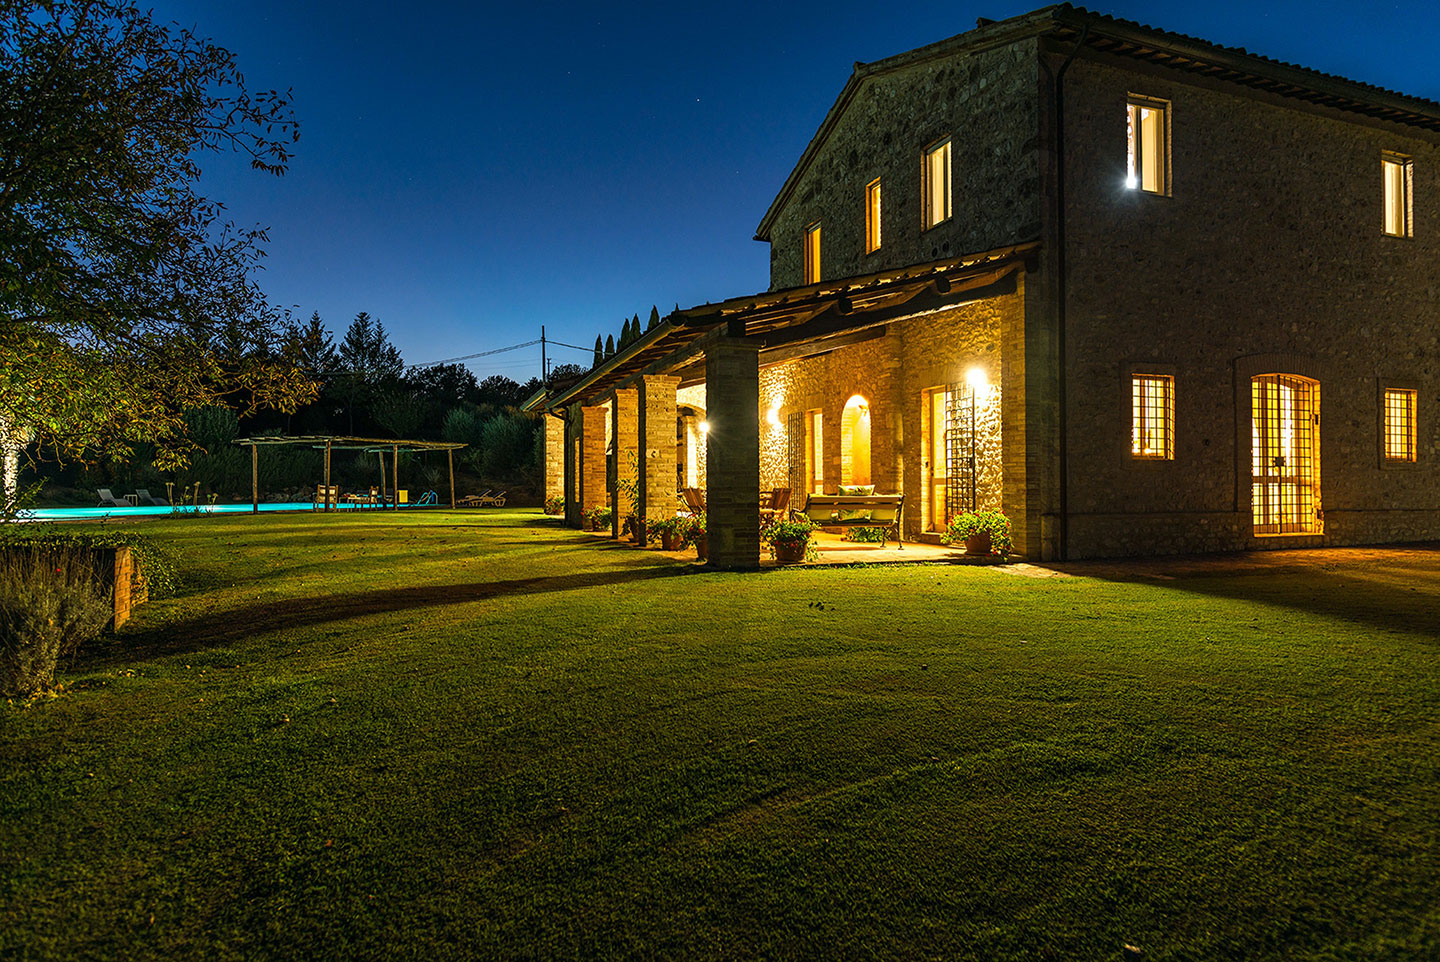 Casa Cicognola, Luxury Villa For Rent in Umbria, Italy | Luxury Vacation Rental in Italy | Finest Residences